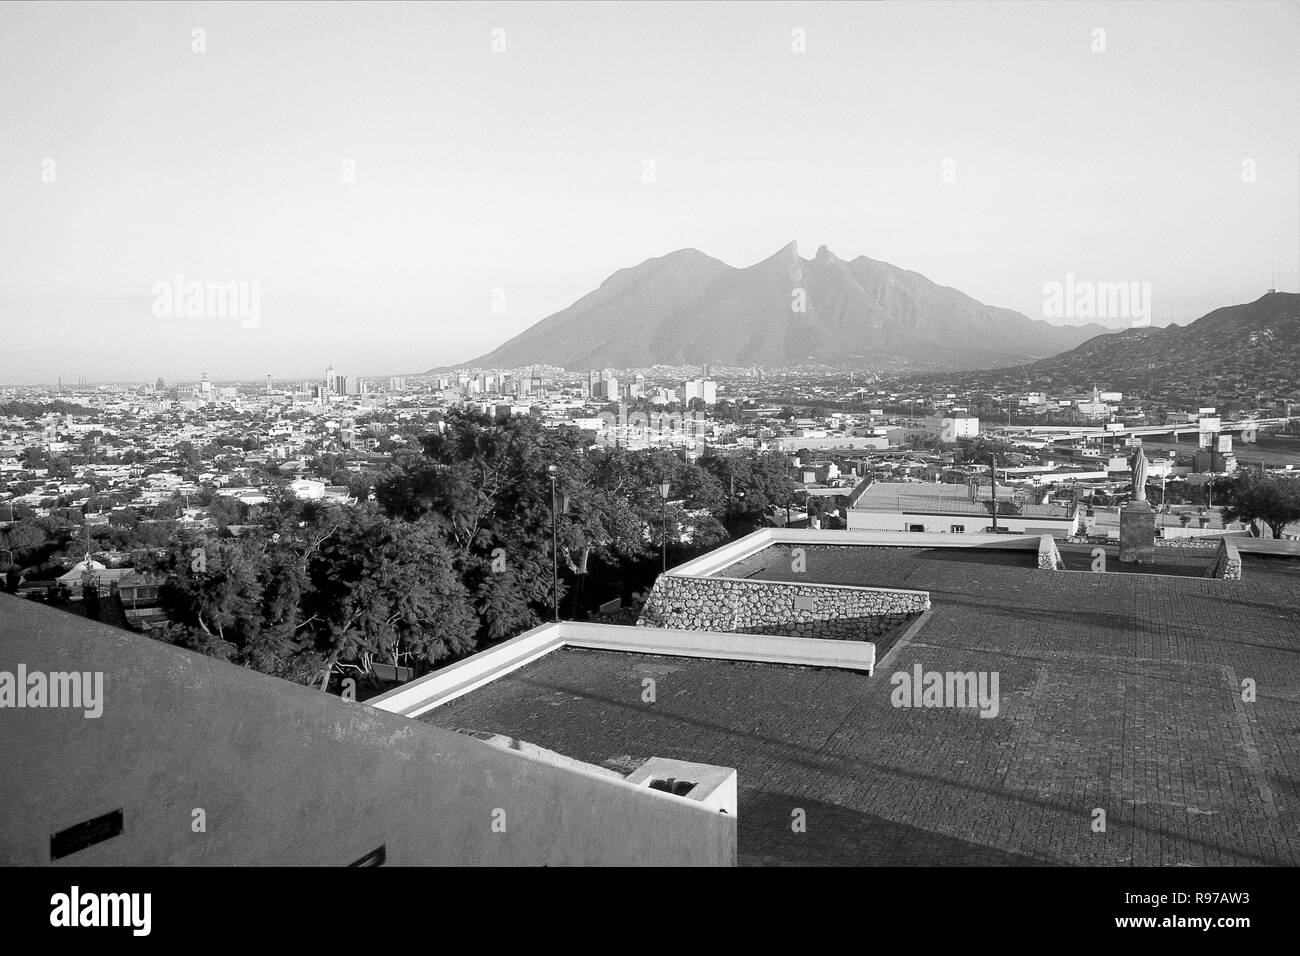 MONTERREY, NL/MEXICO - NOV 20, 2002: View from the Bishop's museum, La Silla hill on the background Stock Photo